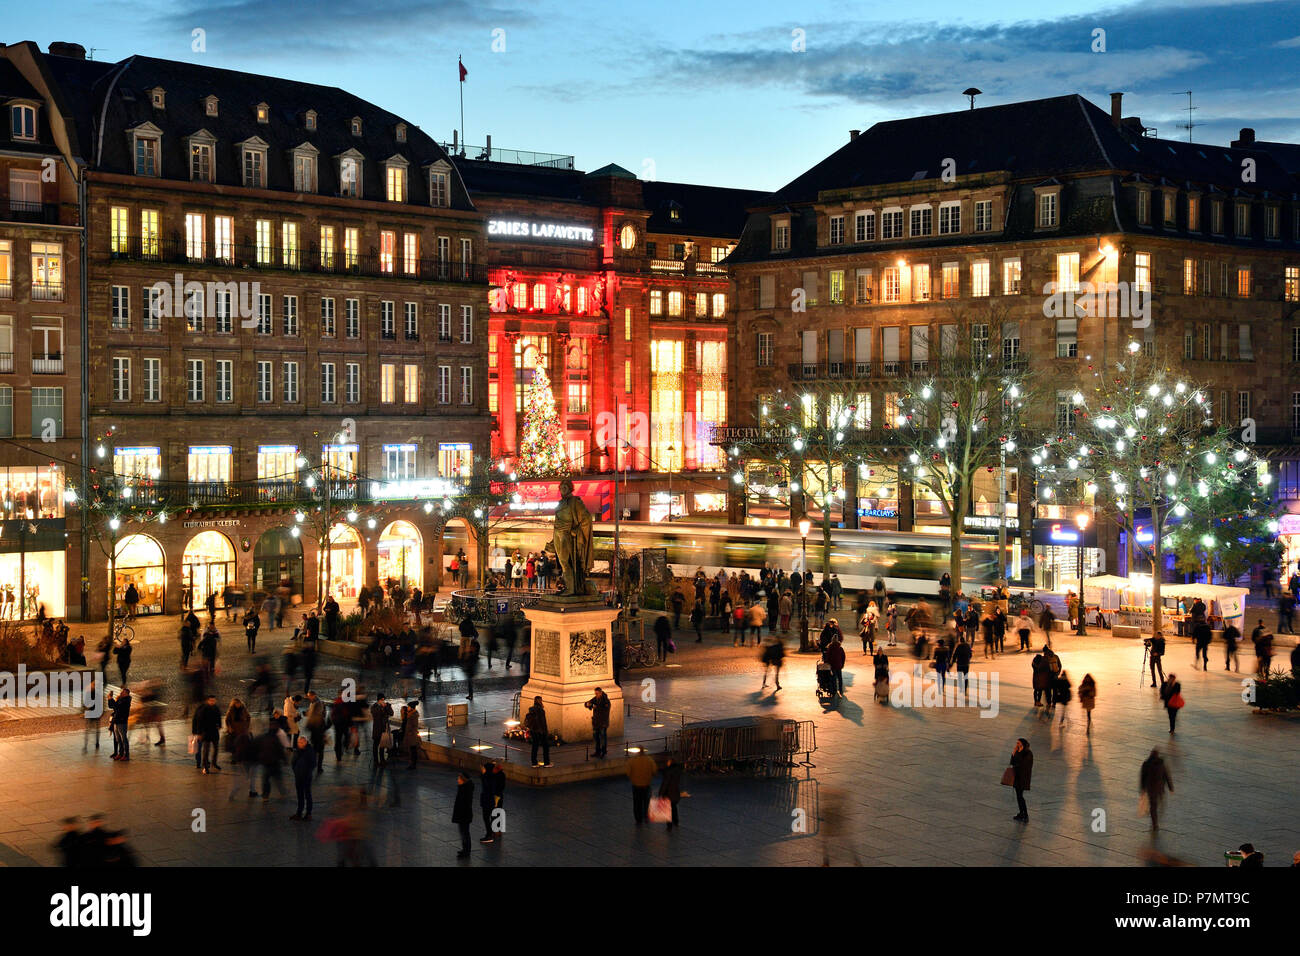 France, Bas Rhin, Strasbourg, old town listed as World Heritage by UNESCO, Kleber statue on Place Kleber, Christmas decoration on the Galeries Lafayettes Department store, Rue du 22 Novembre and Rue des Francs Stock Photo